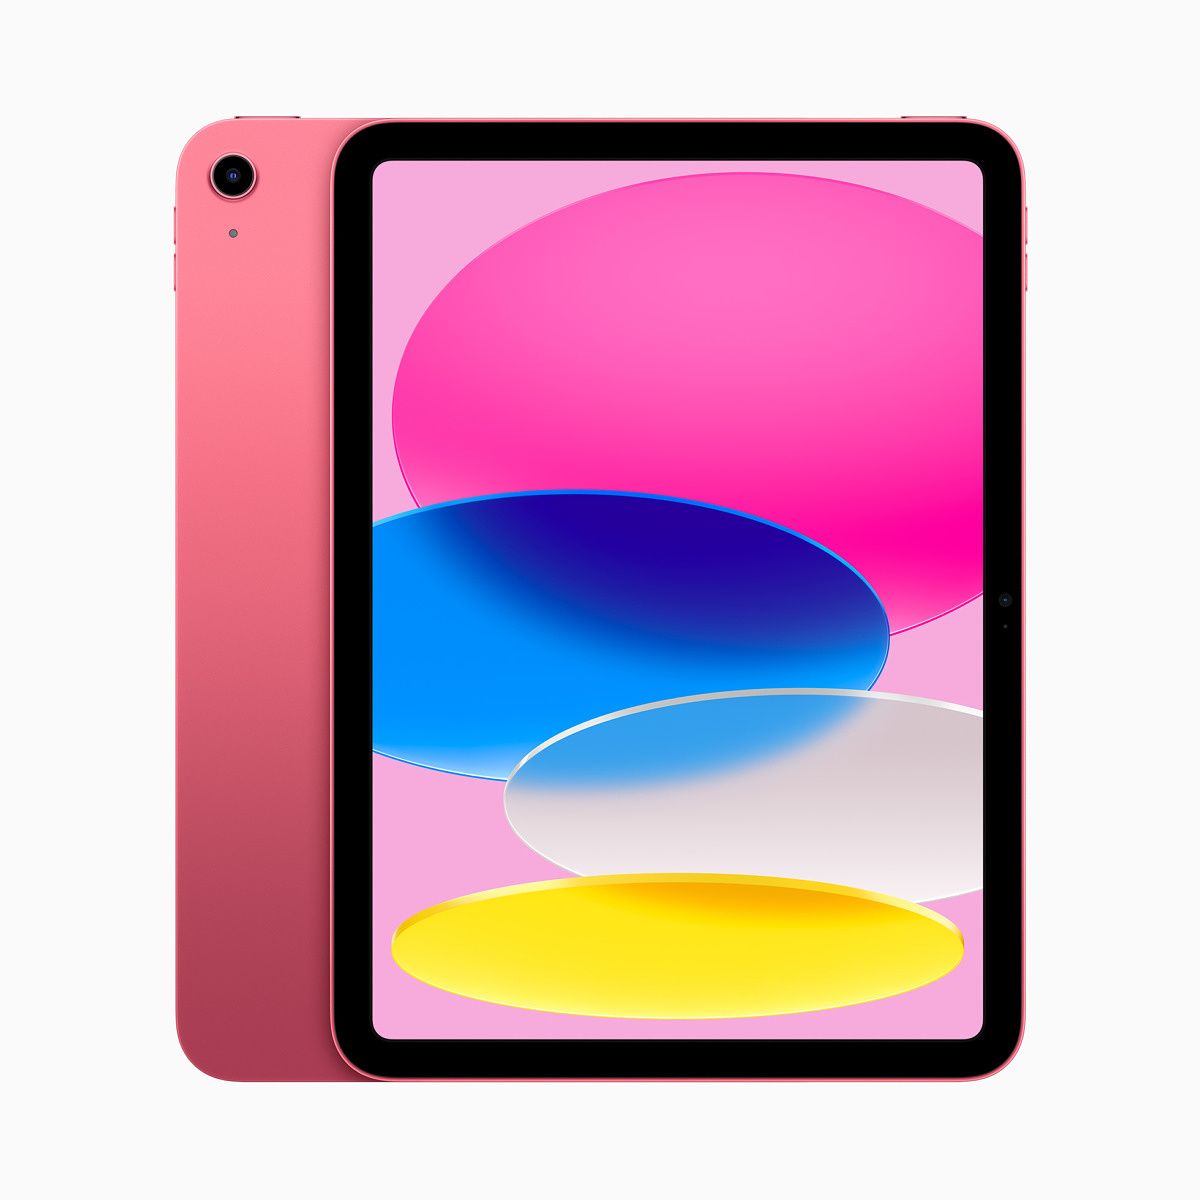 The iPad 10 introduces a complete chassis overhaul and offers four bold colors. It packs the A14 Bionic chip and supports the Apple Pencil 1.